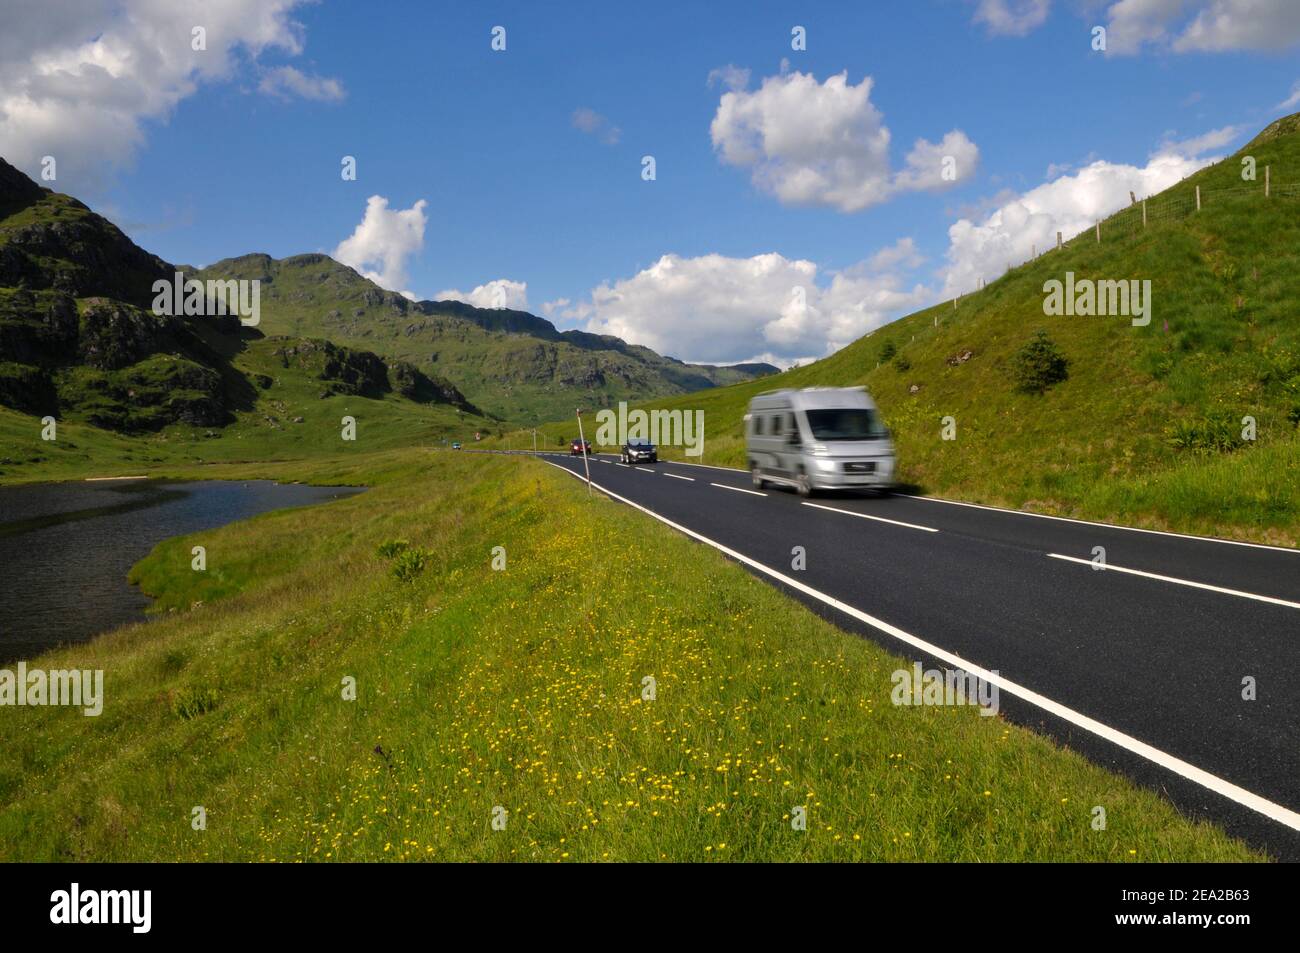 Camper van on scenic road in Scotland. Road A83 in Argyll and Bute. Stock Photo